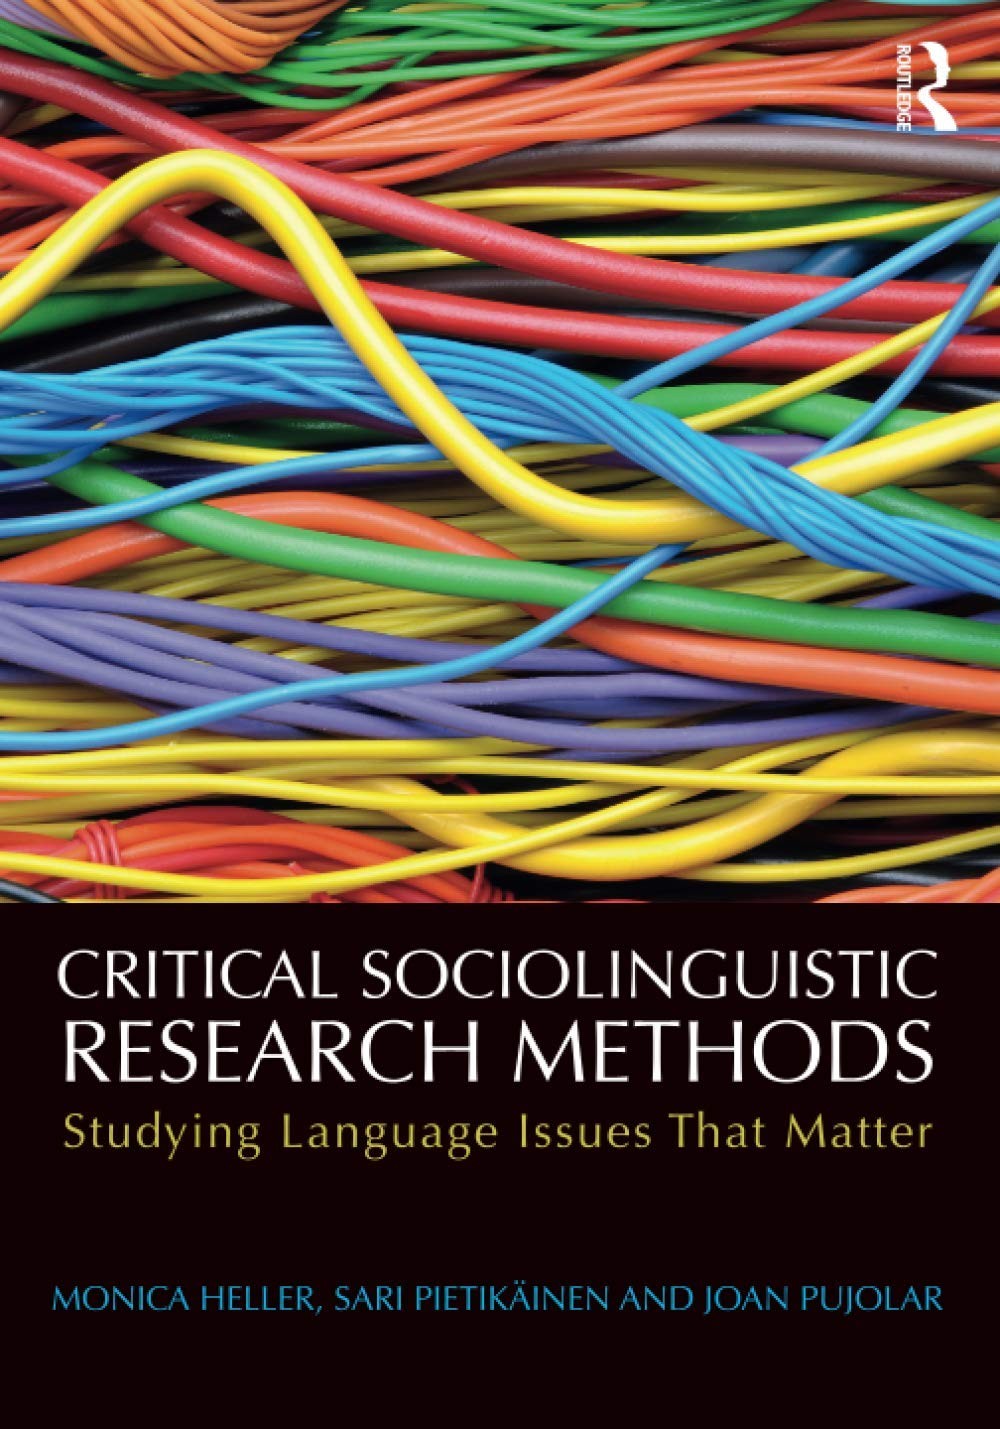 Critical Sociolinguistic Research Methods: Studying Language Issues That Matter